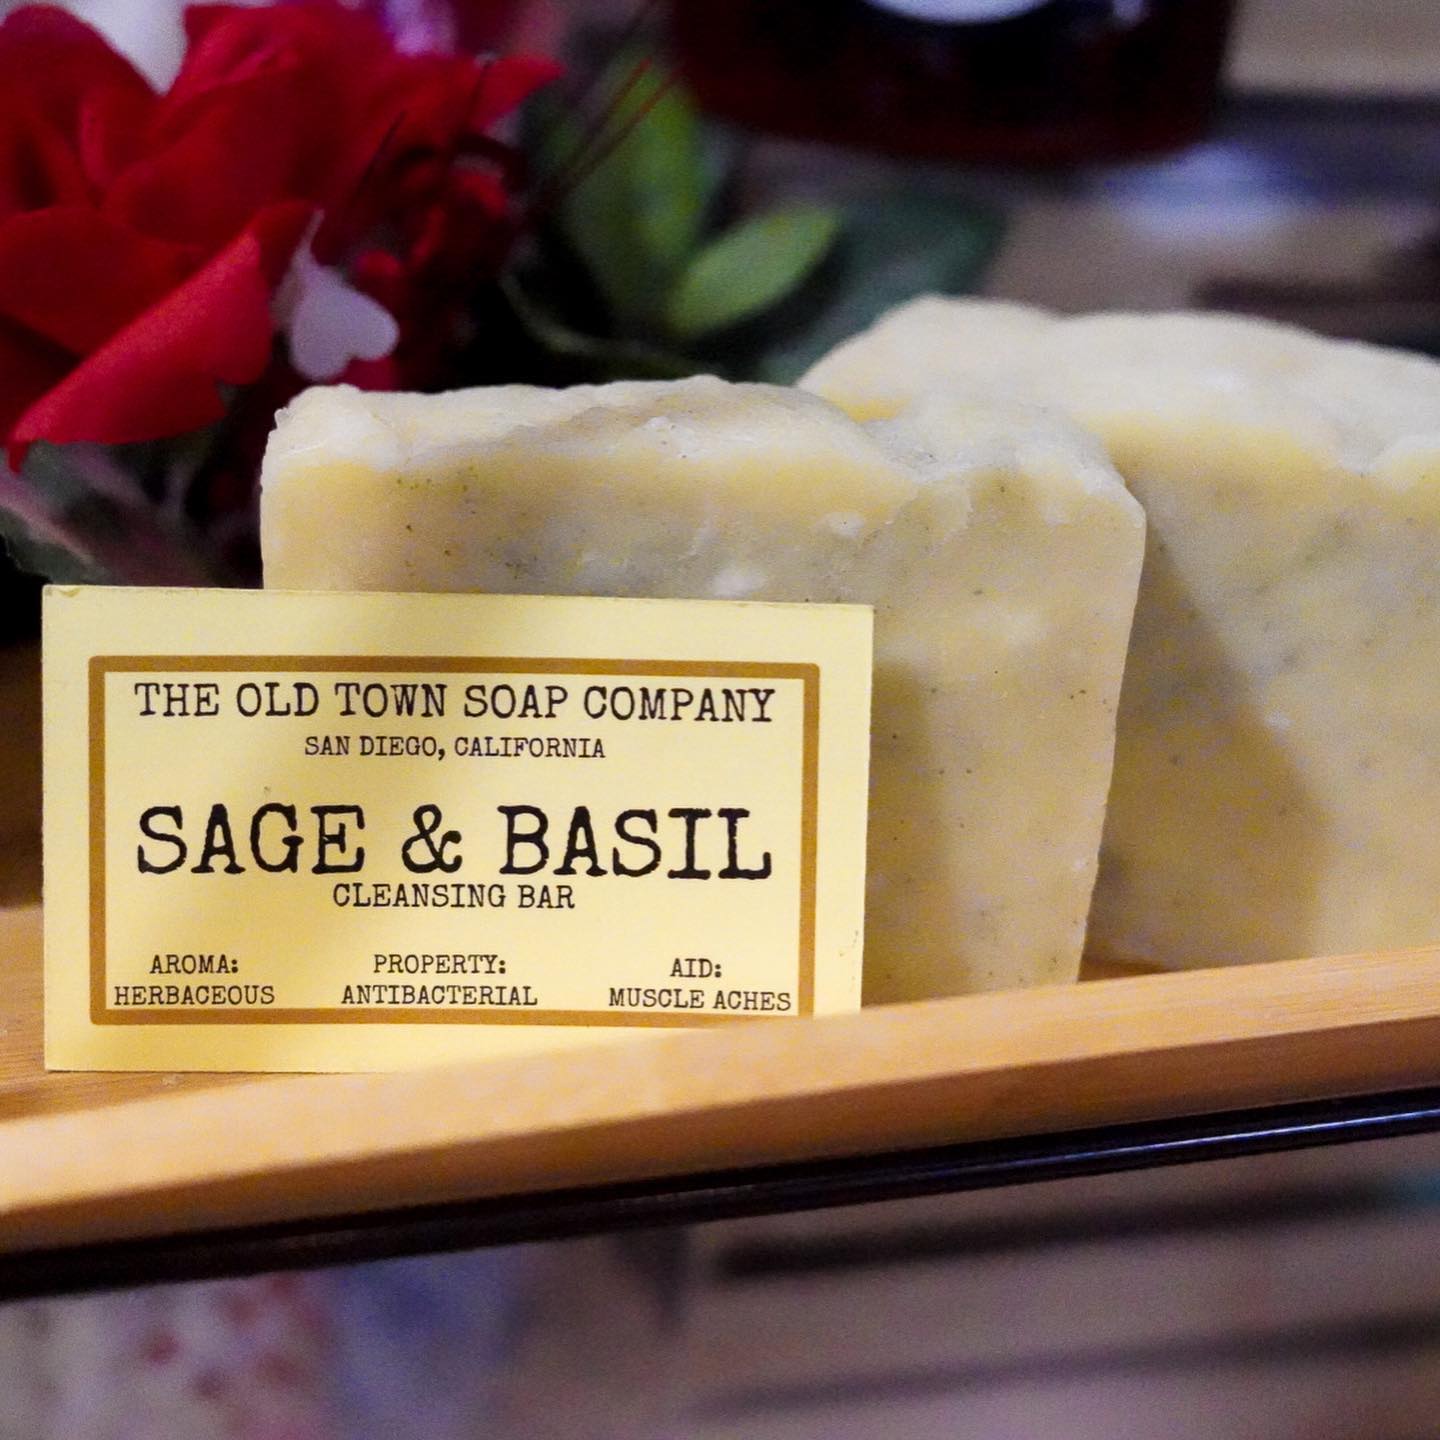 The Old Town Soap Company soap